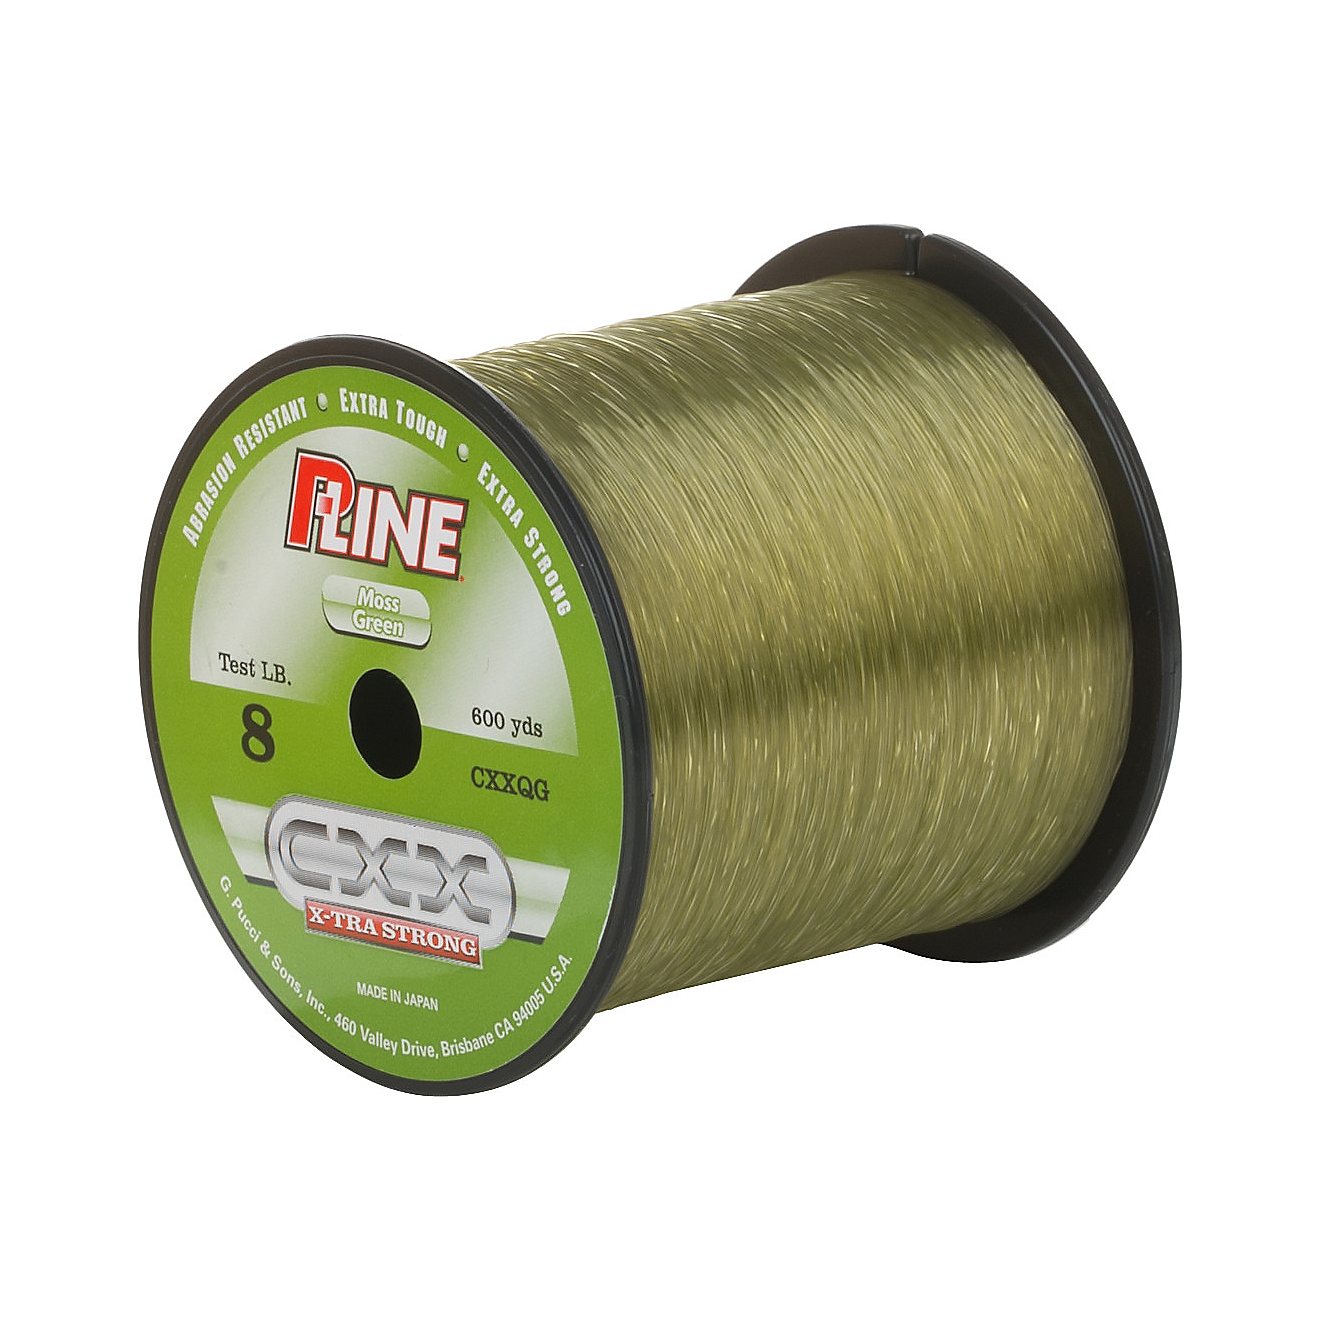 P-Line Cxx Moss Green X-Tra Strong Fishing Line 600 Yards Select Lb Test 